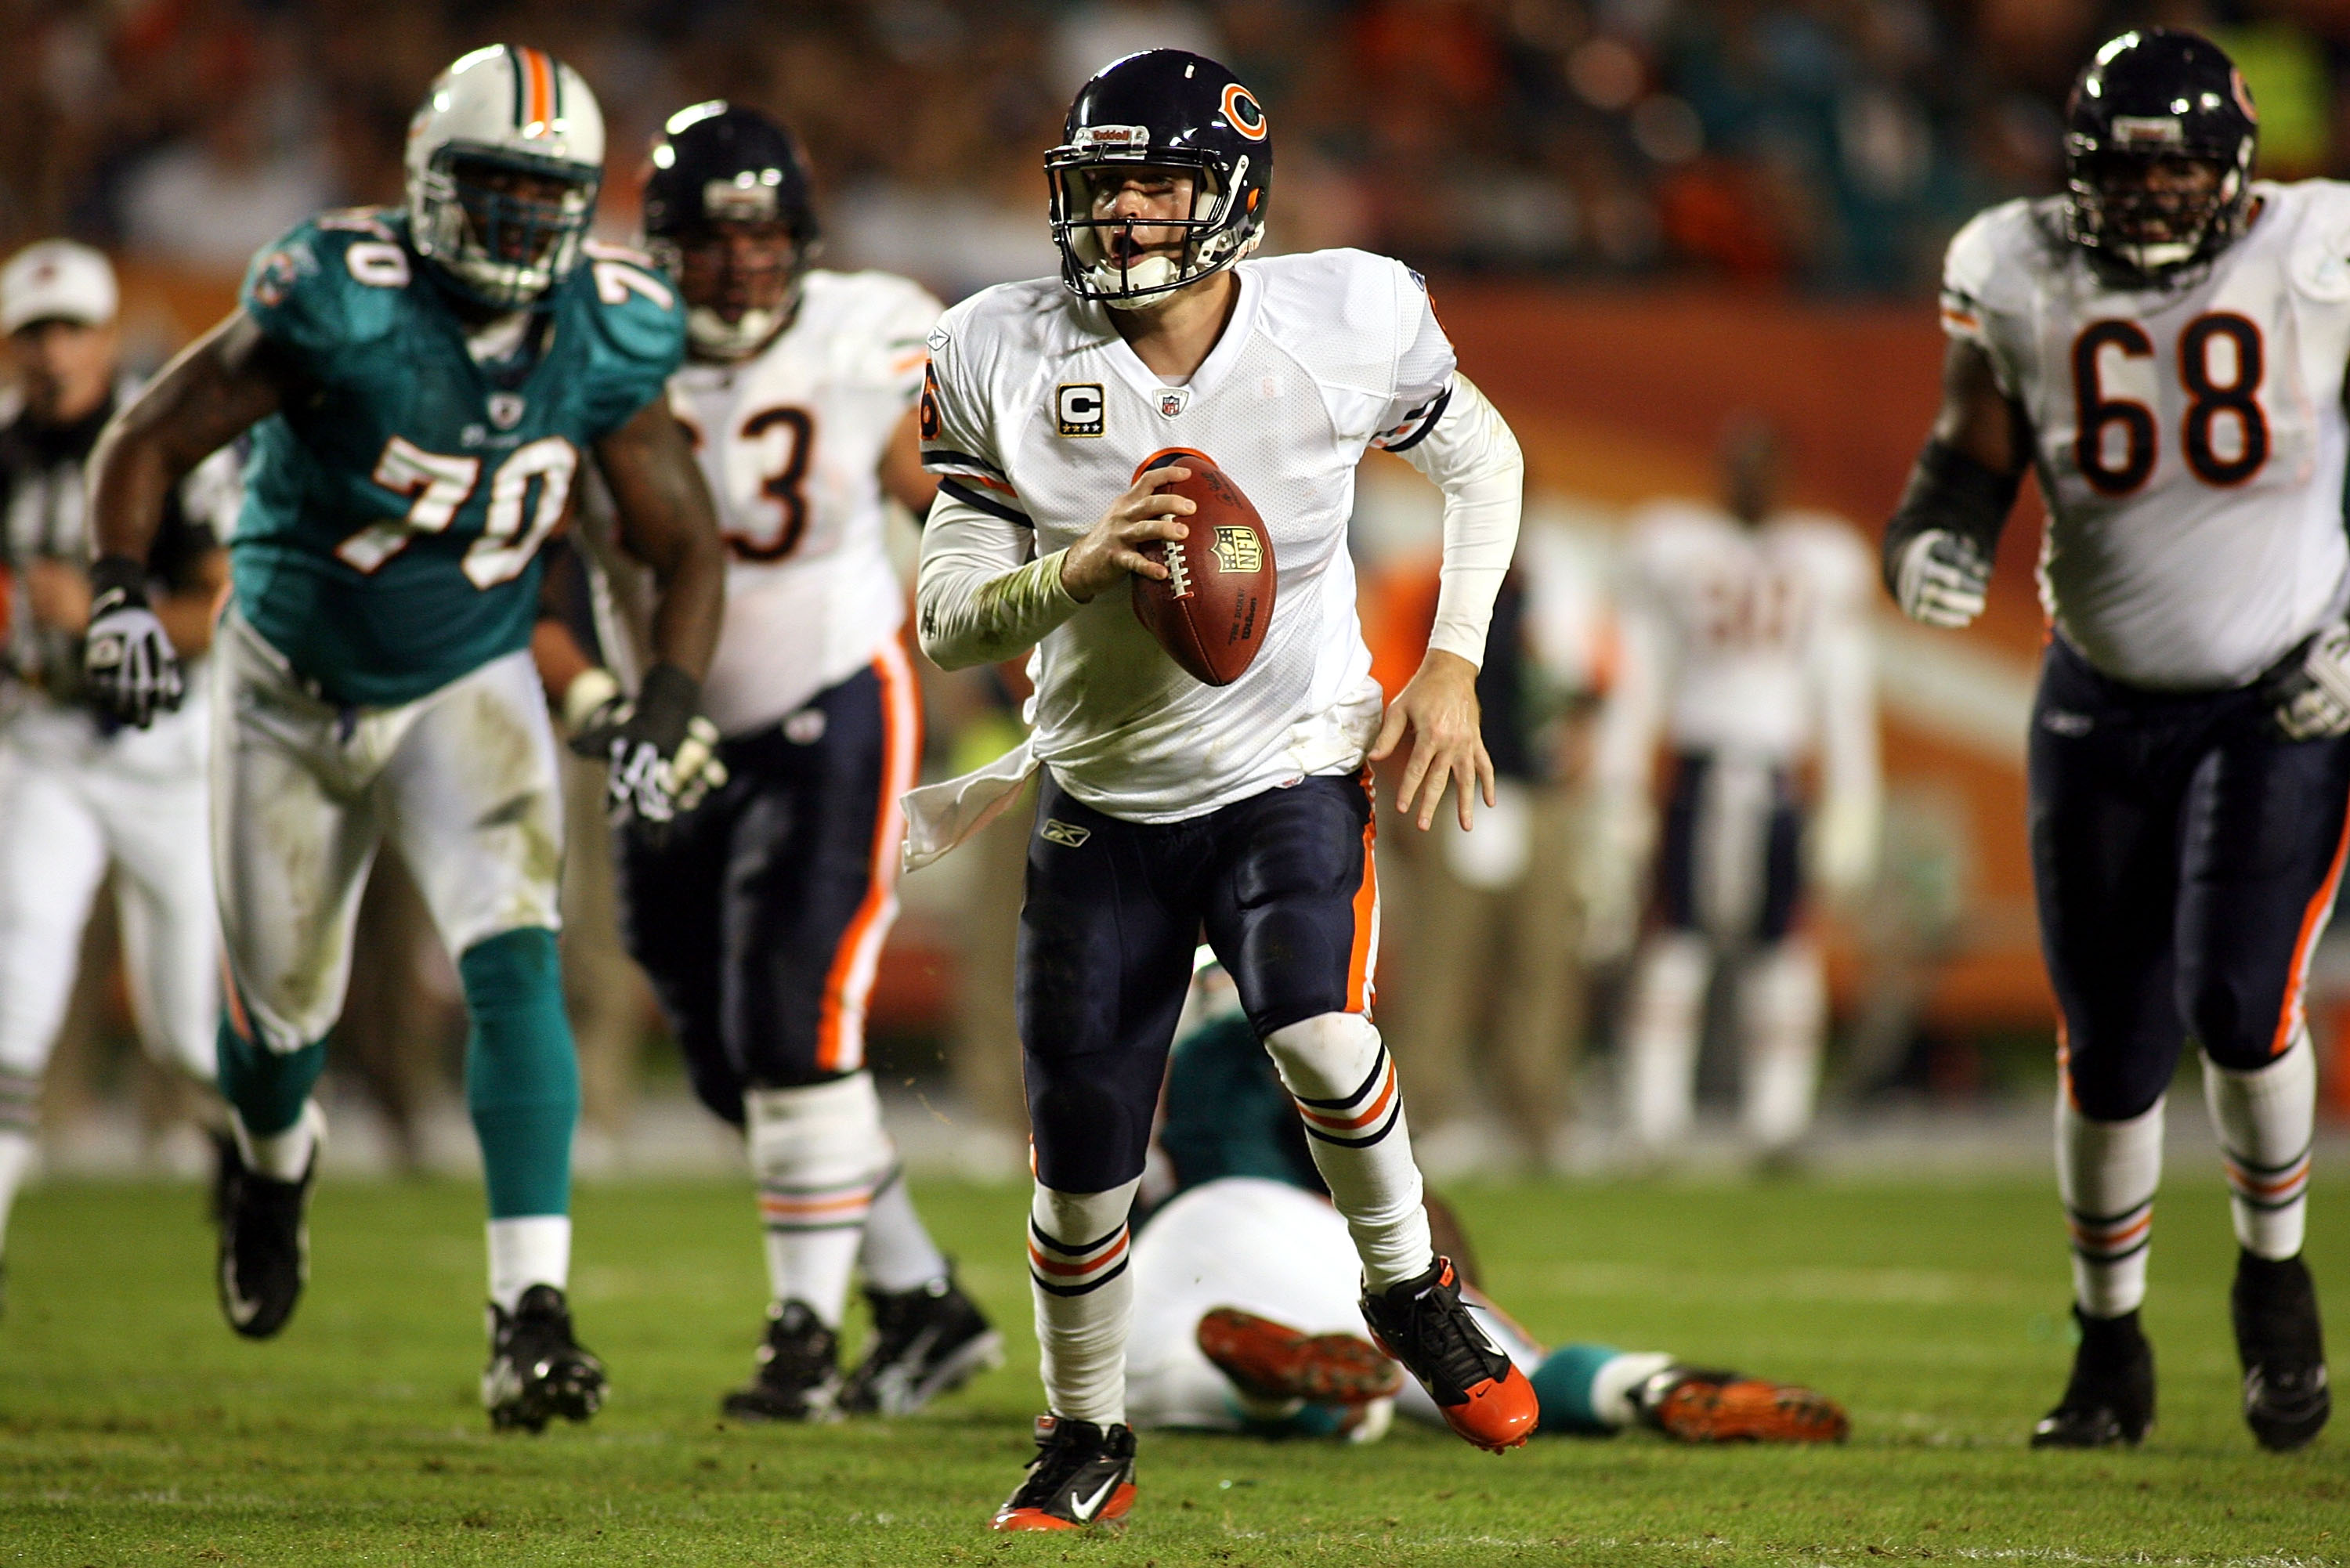 Chicago Bears Versus the Miami Dolphins: 10 Things We Learned